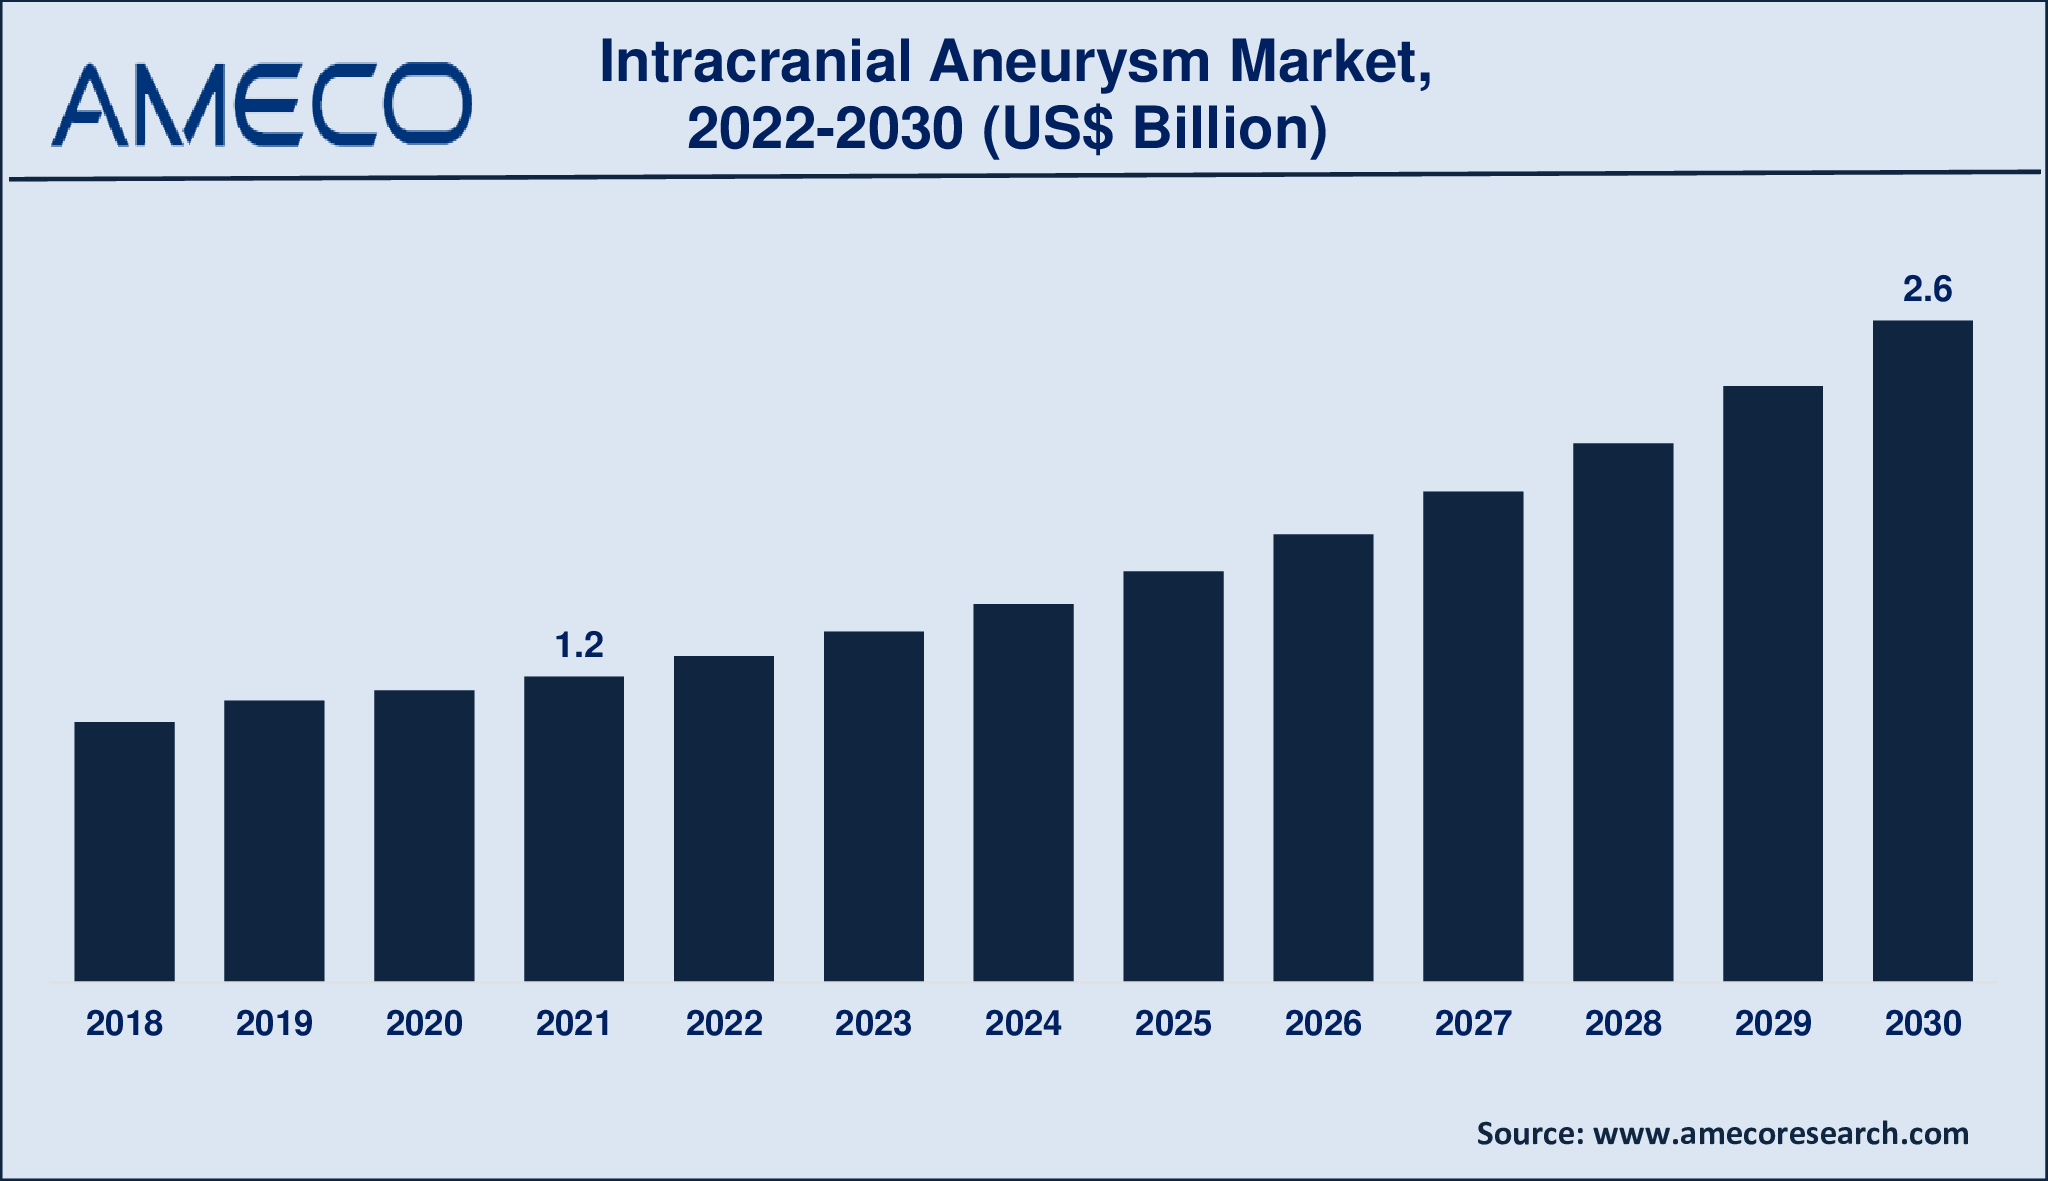 Intracranial Aneurysm Market Size, Share, Growth, Trends, and Forecast 2022-2030